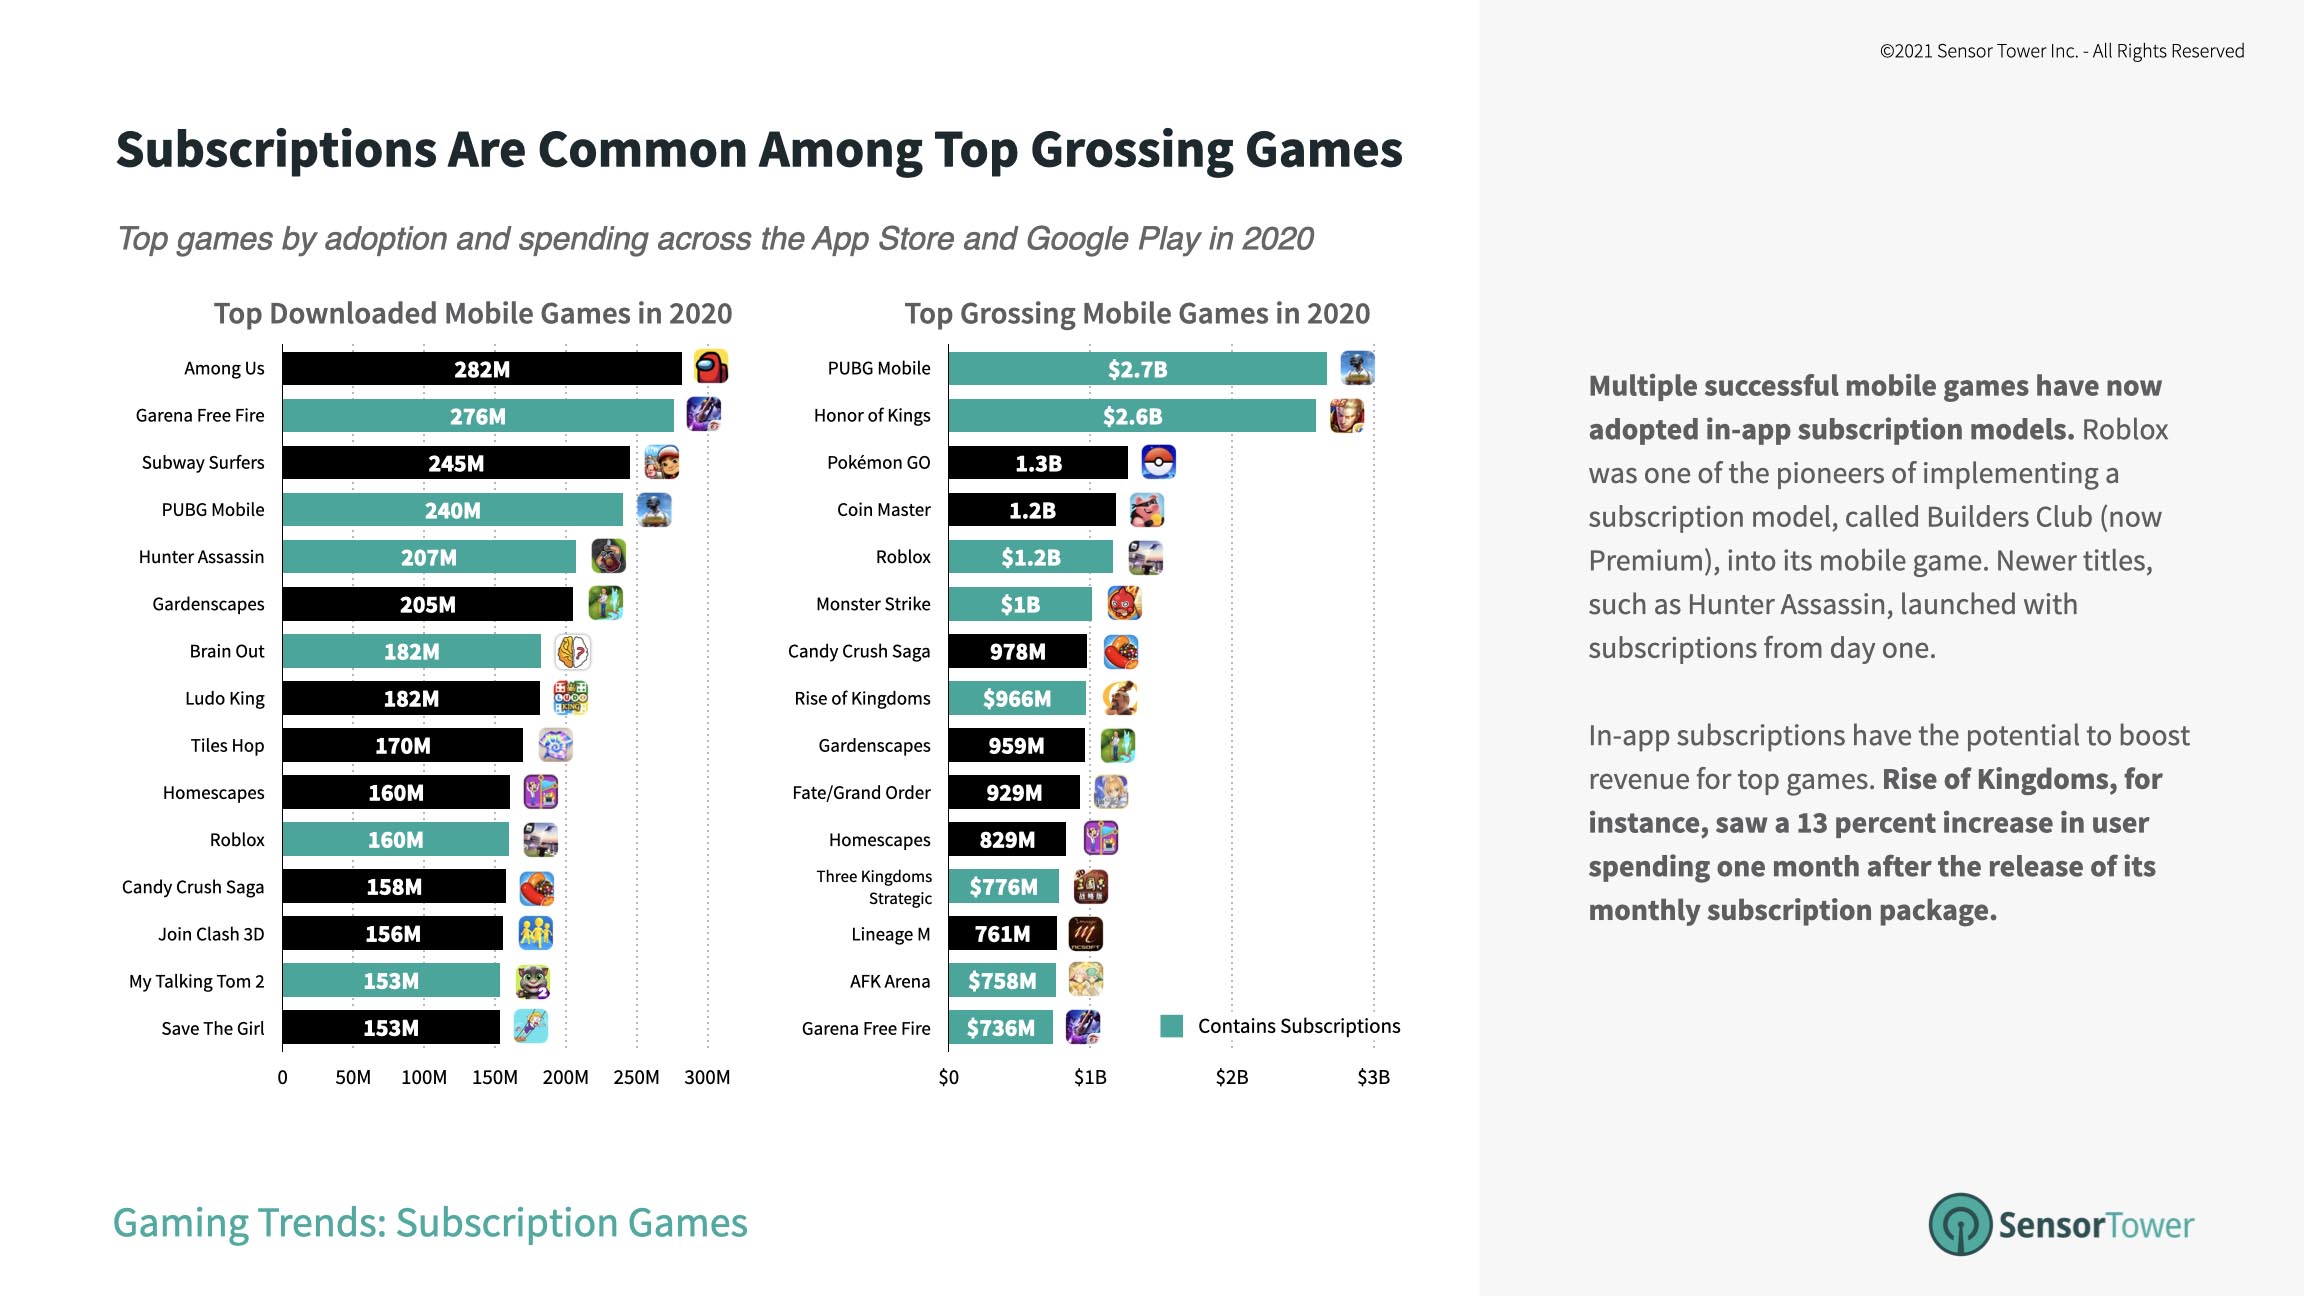 Eight of the 15 top grossing mobile games included in-app subscriptions in 2020.